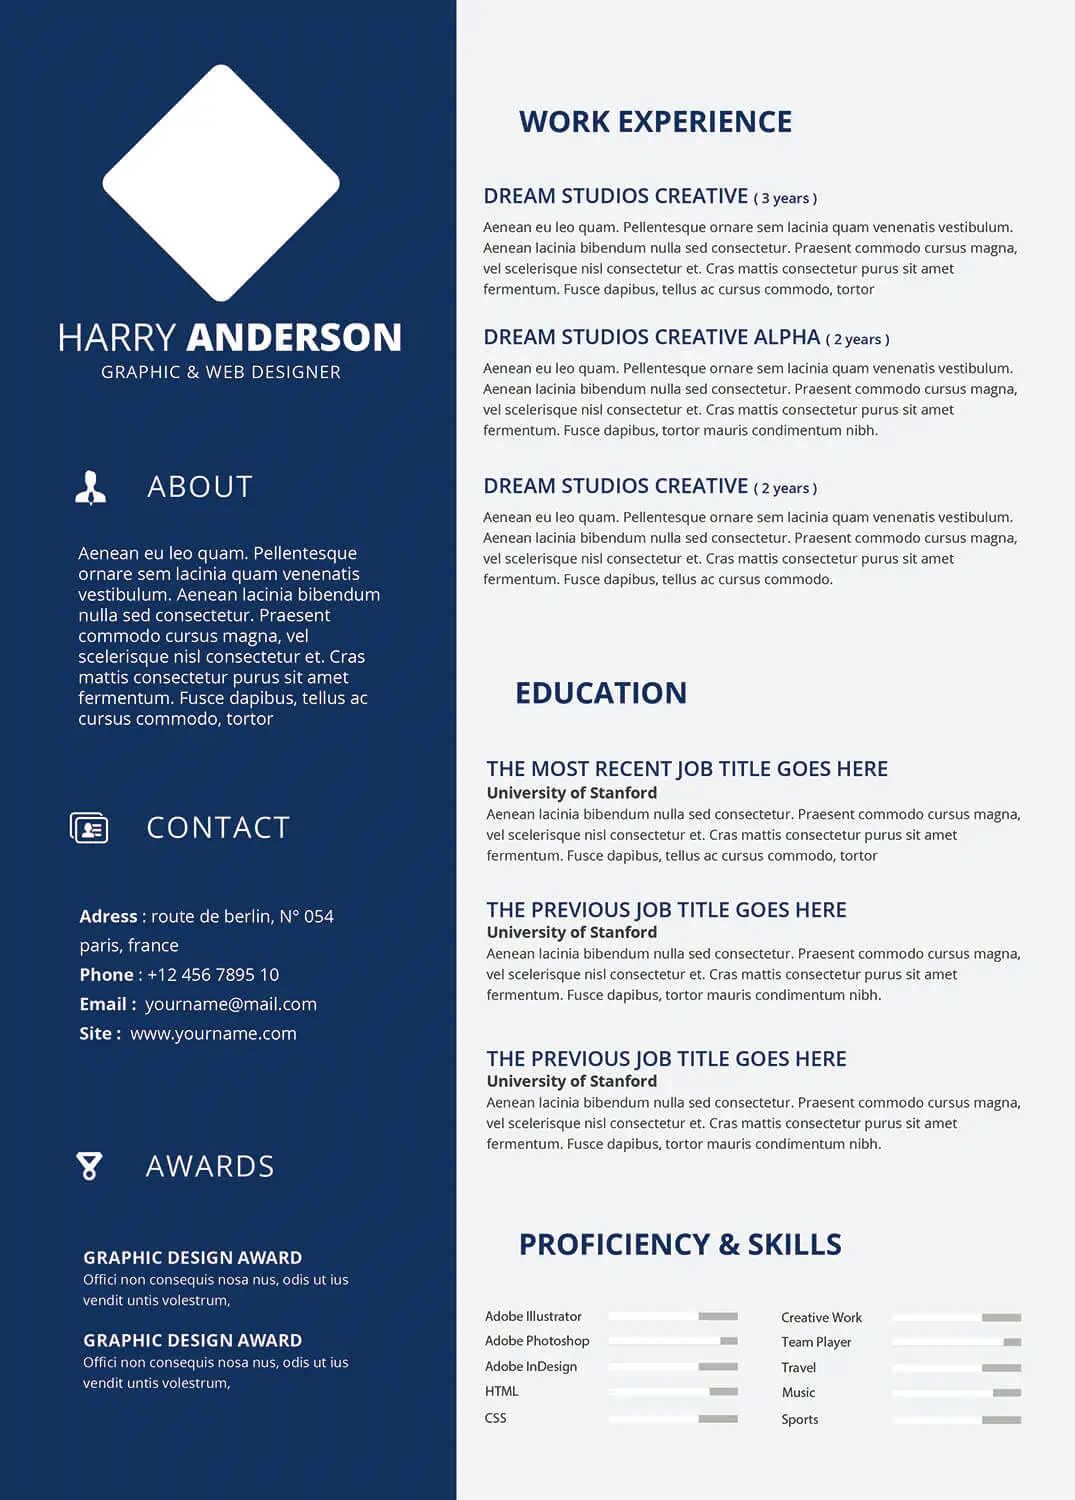 Lawyer Resume Templates